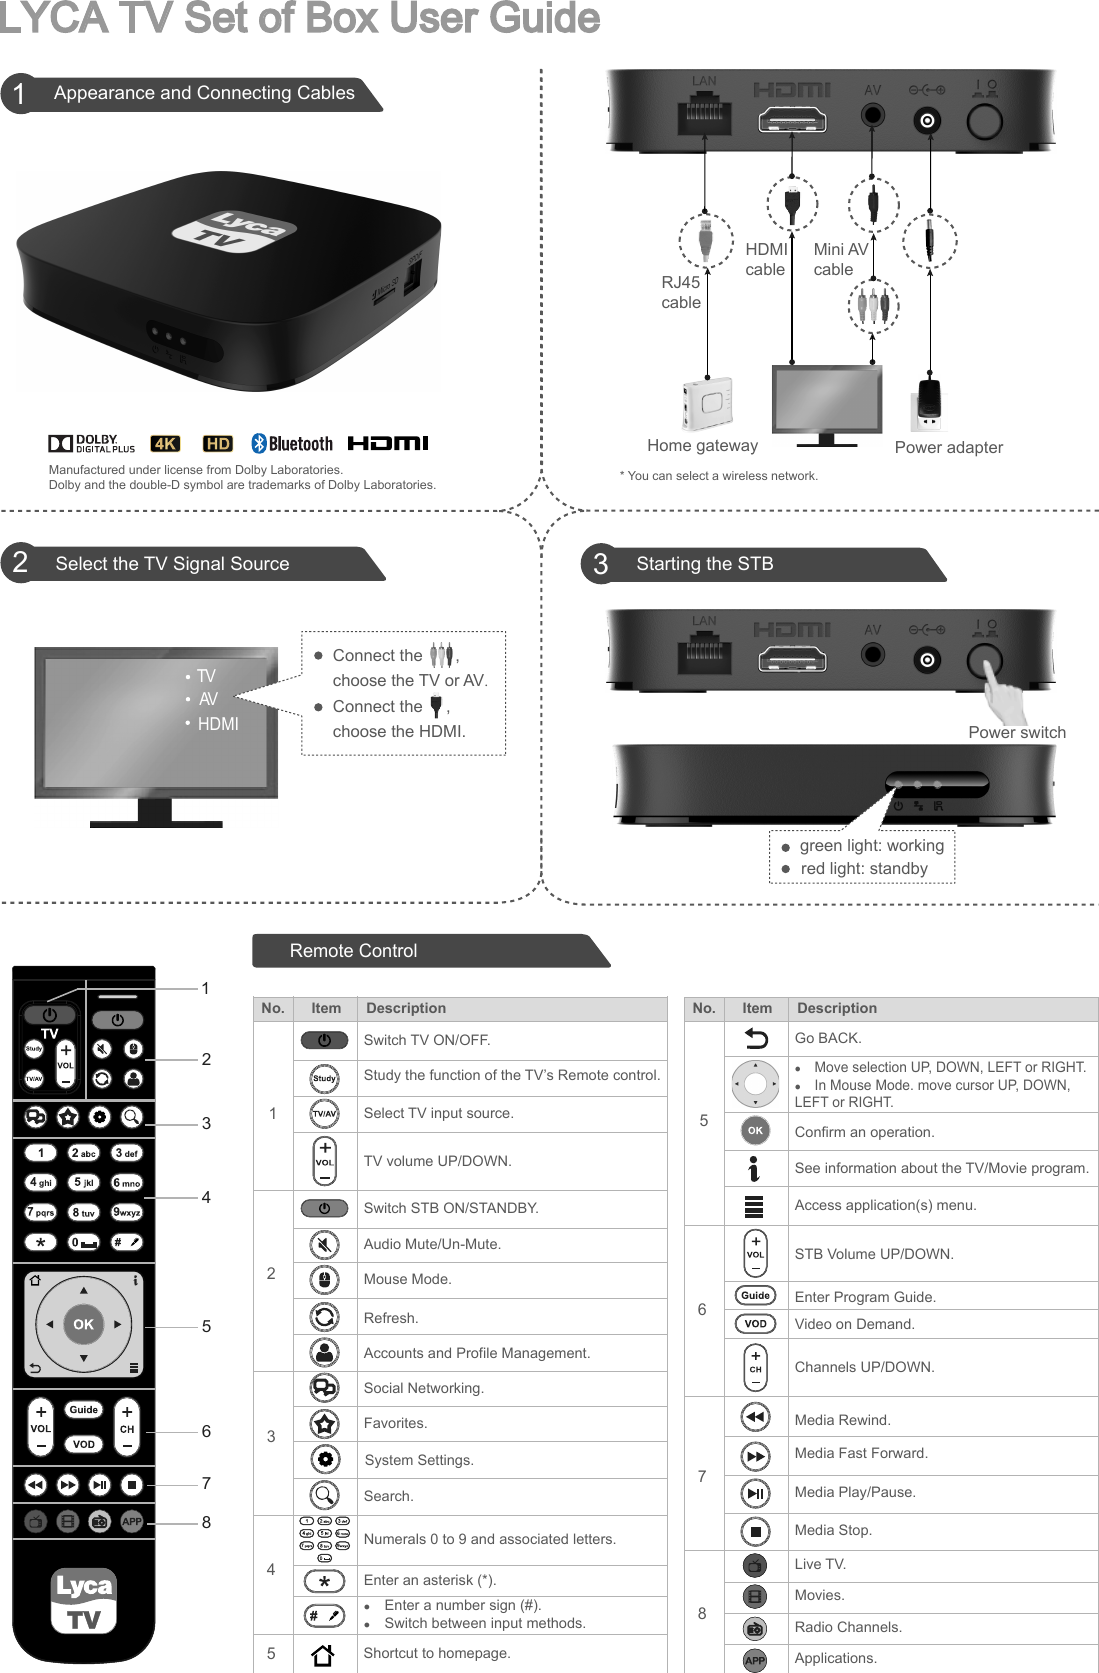 LYCA TV Set of Box User Guide2Select the TV Signal Source 3Starting the STBAppearance and Connecting Cables 1TV AVHDMIRemote ControlConnect the       ,choose the TV or AV.Connect the     ,choose the HDMI.green light: workingred light: standby12345678* You can select a wireless network. Power switchPower adapterRJ45cableHome gatewayHDMIcableMini AVcable12345DescriptionItemNo.Switch TV ON/OFF.Study the function of the TV’s Remote control.TV volume UP/DOWN.Select TV input source.Switch STB ON/STANDBY.Audio Mute/Un-Mute.Mouse Mode.Accounts and Profile Management.Refresh.Social Networking.Favorites.Search.Numerals 0 to 9 and associated letters.Enter an asterisk (*). Enter a number sign (#).  Switch between input methods.5678DescriptionItemNo.Shortcut to homepage.Go BACK. Move selection UP, DOWN, LEFT or RIGHT. In Mouse Mode. move cursor UP, DOWN, LEFT or RIGHT.Confirm an operation.See information about the TV/Movie program.Access application(s) menu.STB Volume UP/DOWN.Video on Demand.Enter Program Guide.Channels UP/DOWN.Media Rewind.Media Fast Forward.Media Play/Pause.Media Stop.Live TV.Movies.Radio Channels.Applications.System Settings.Manufactured under license from Dolby Laboratories.Dolby and the double-D symbol are trademarks of Dolby Laboratories.